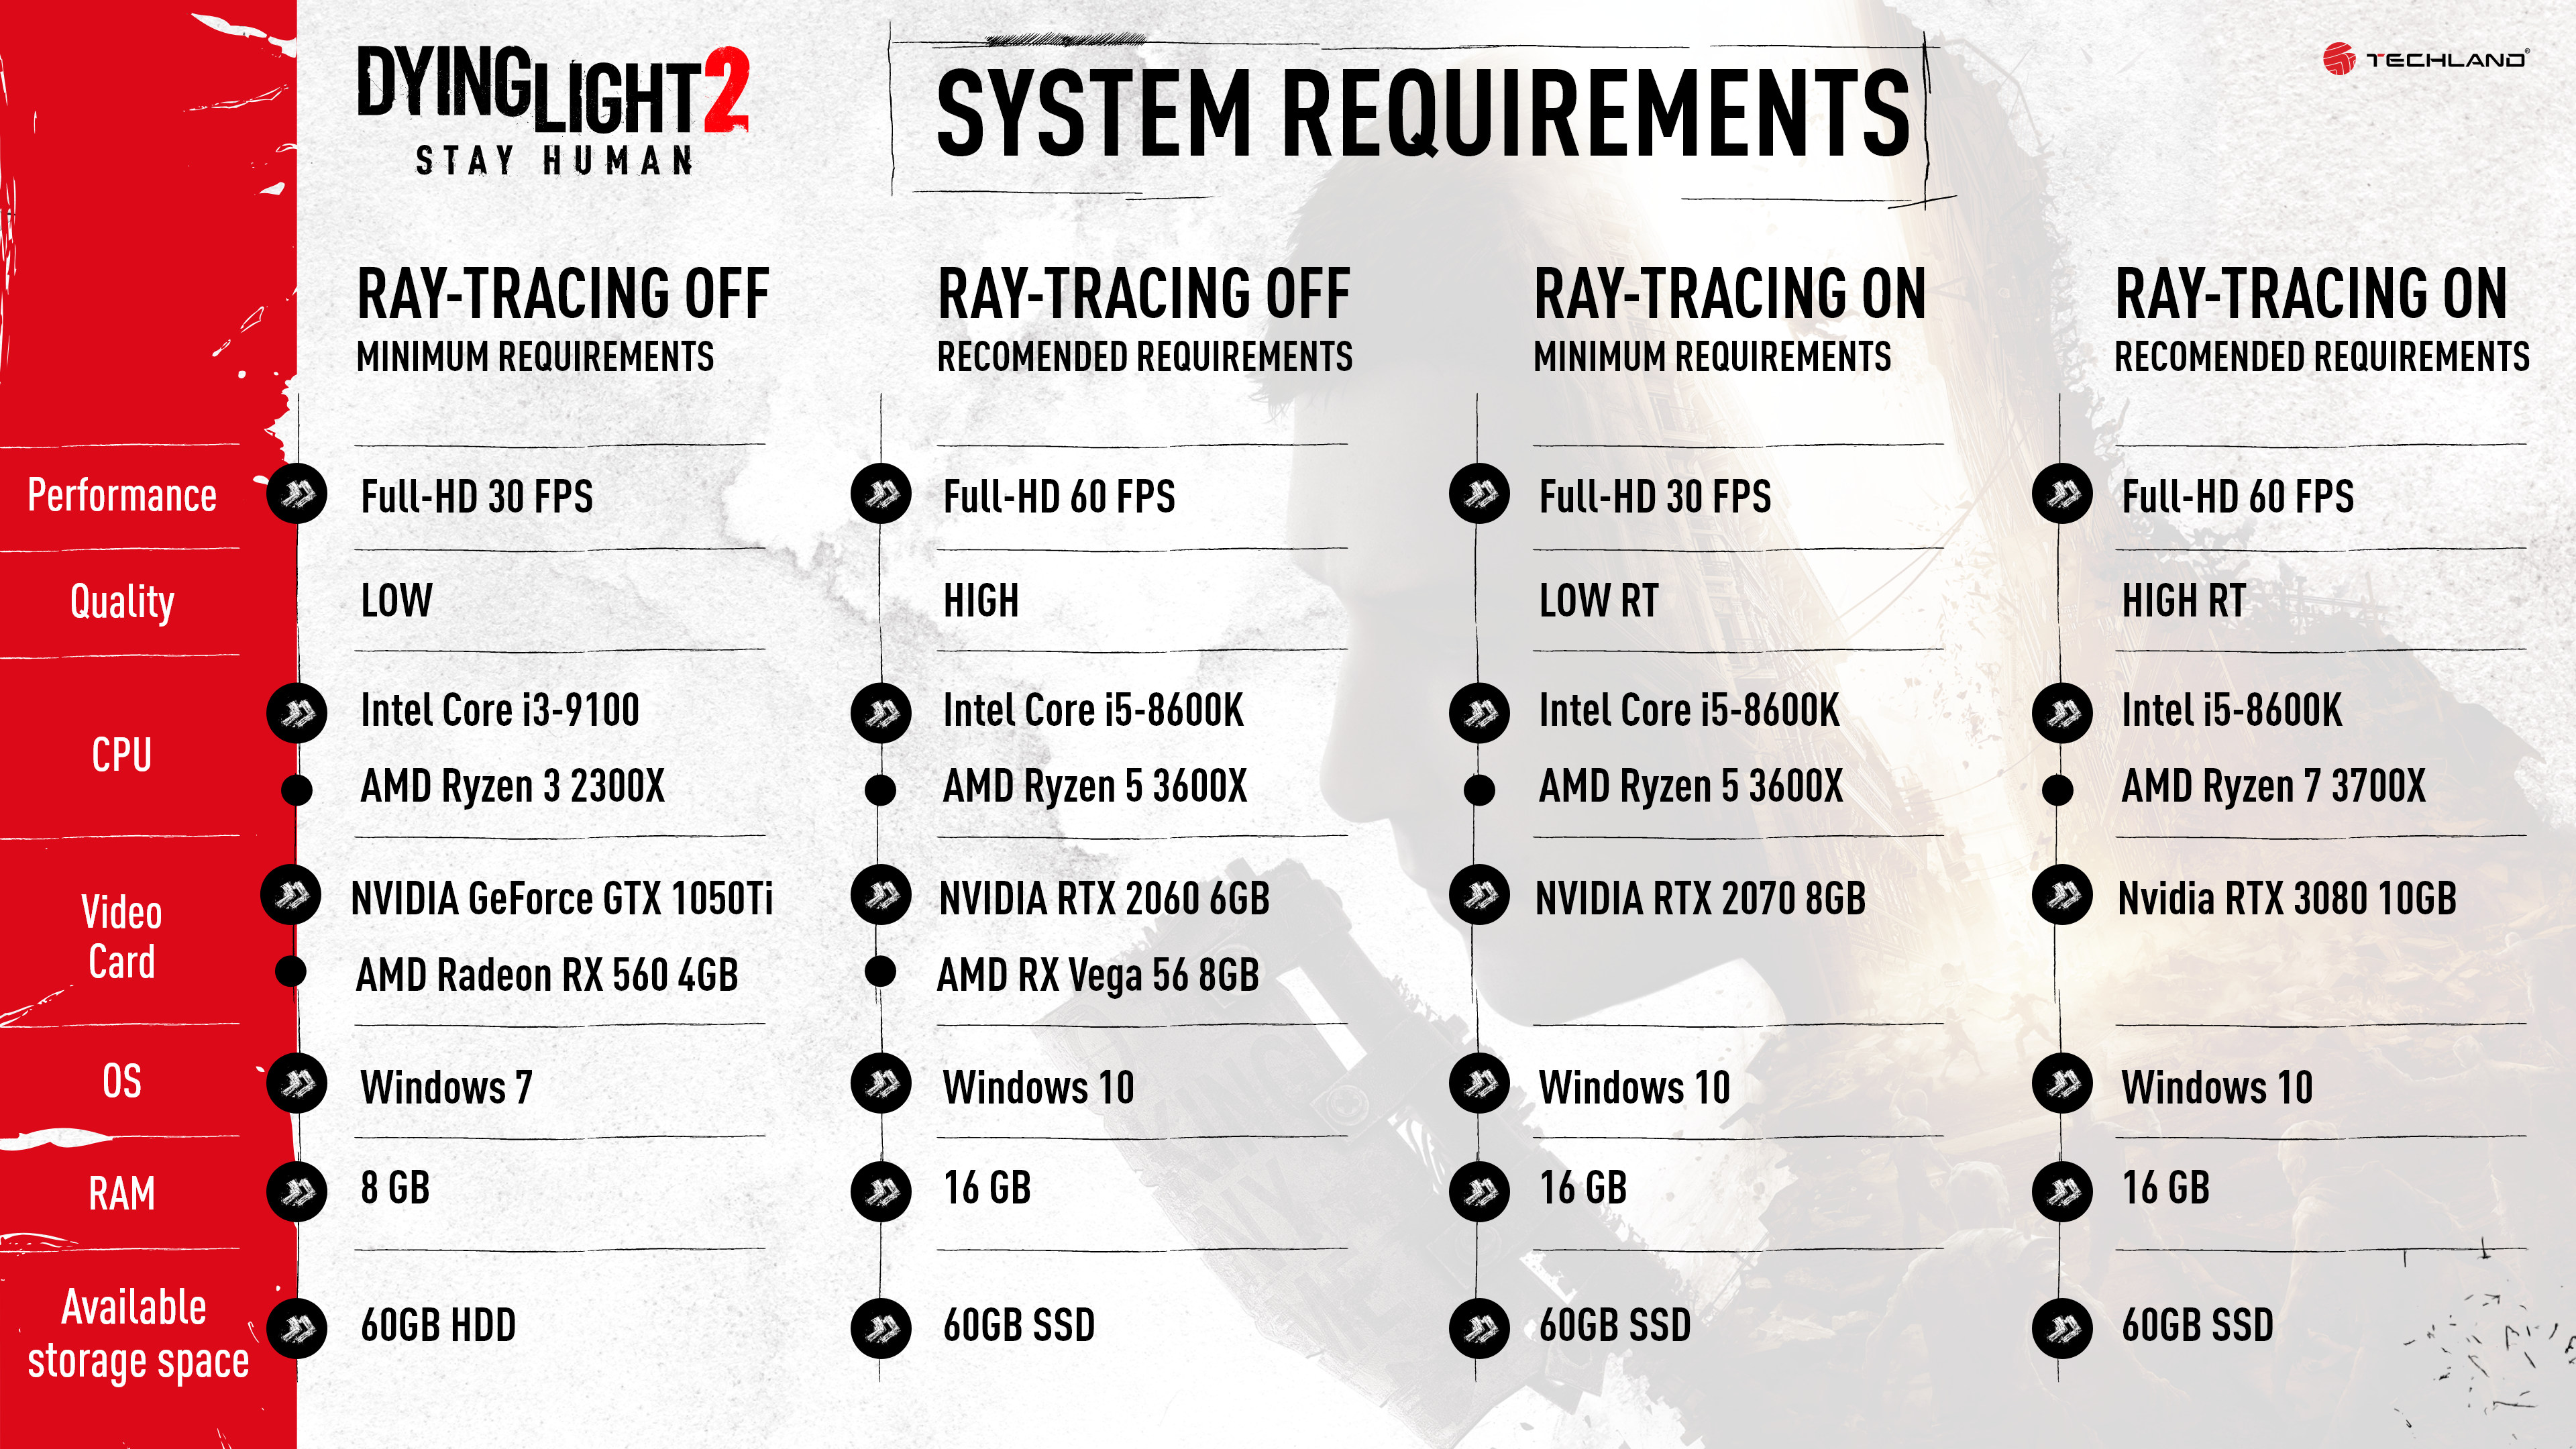 Dying-Light-2-PC-system-requirements.jpg